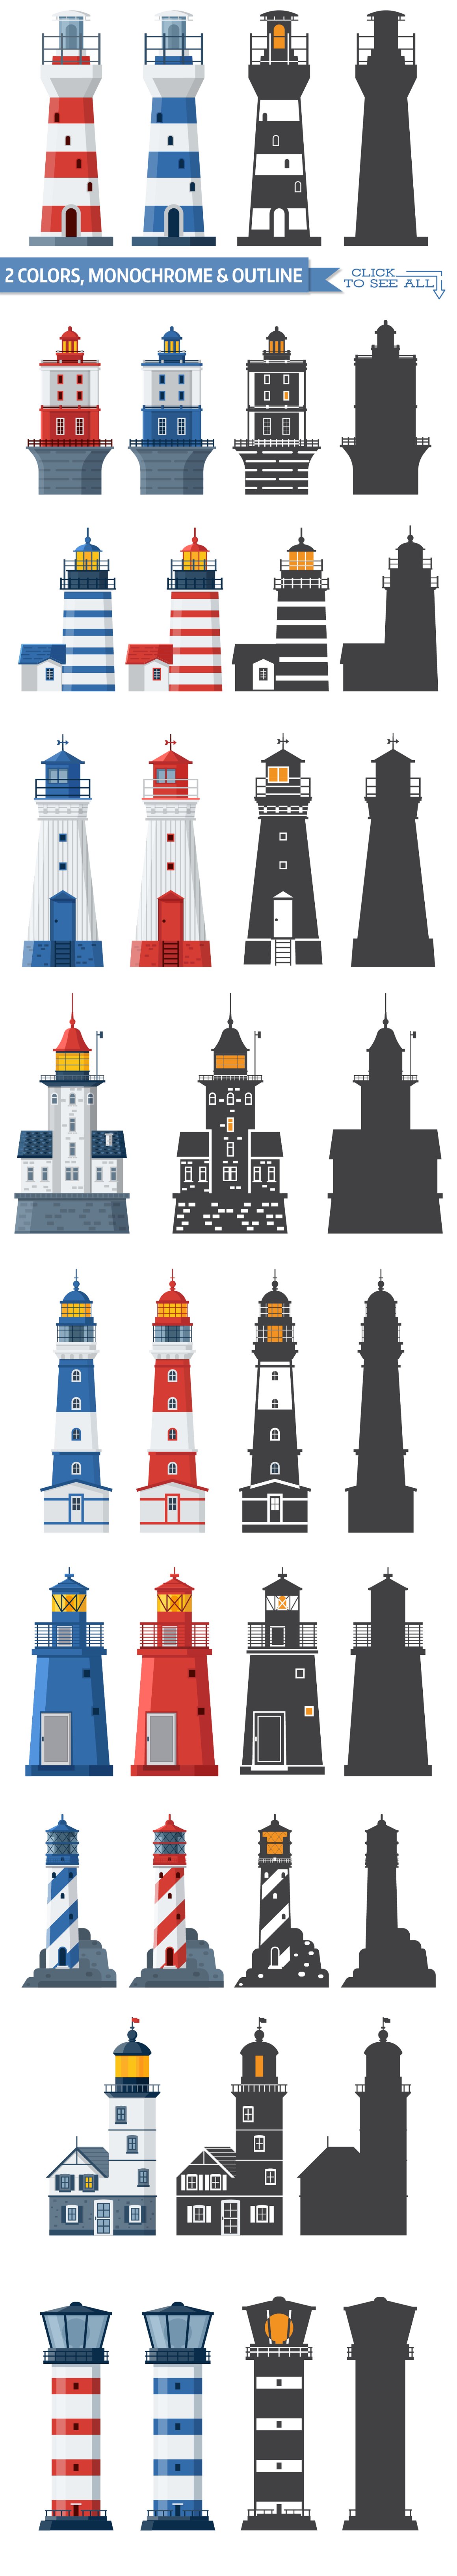 Great images of different lighthouses.